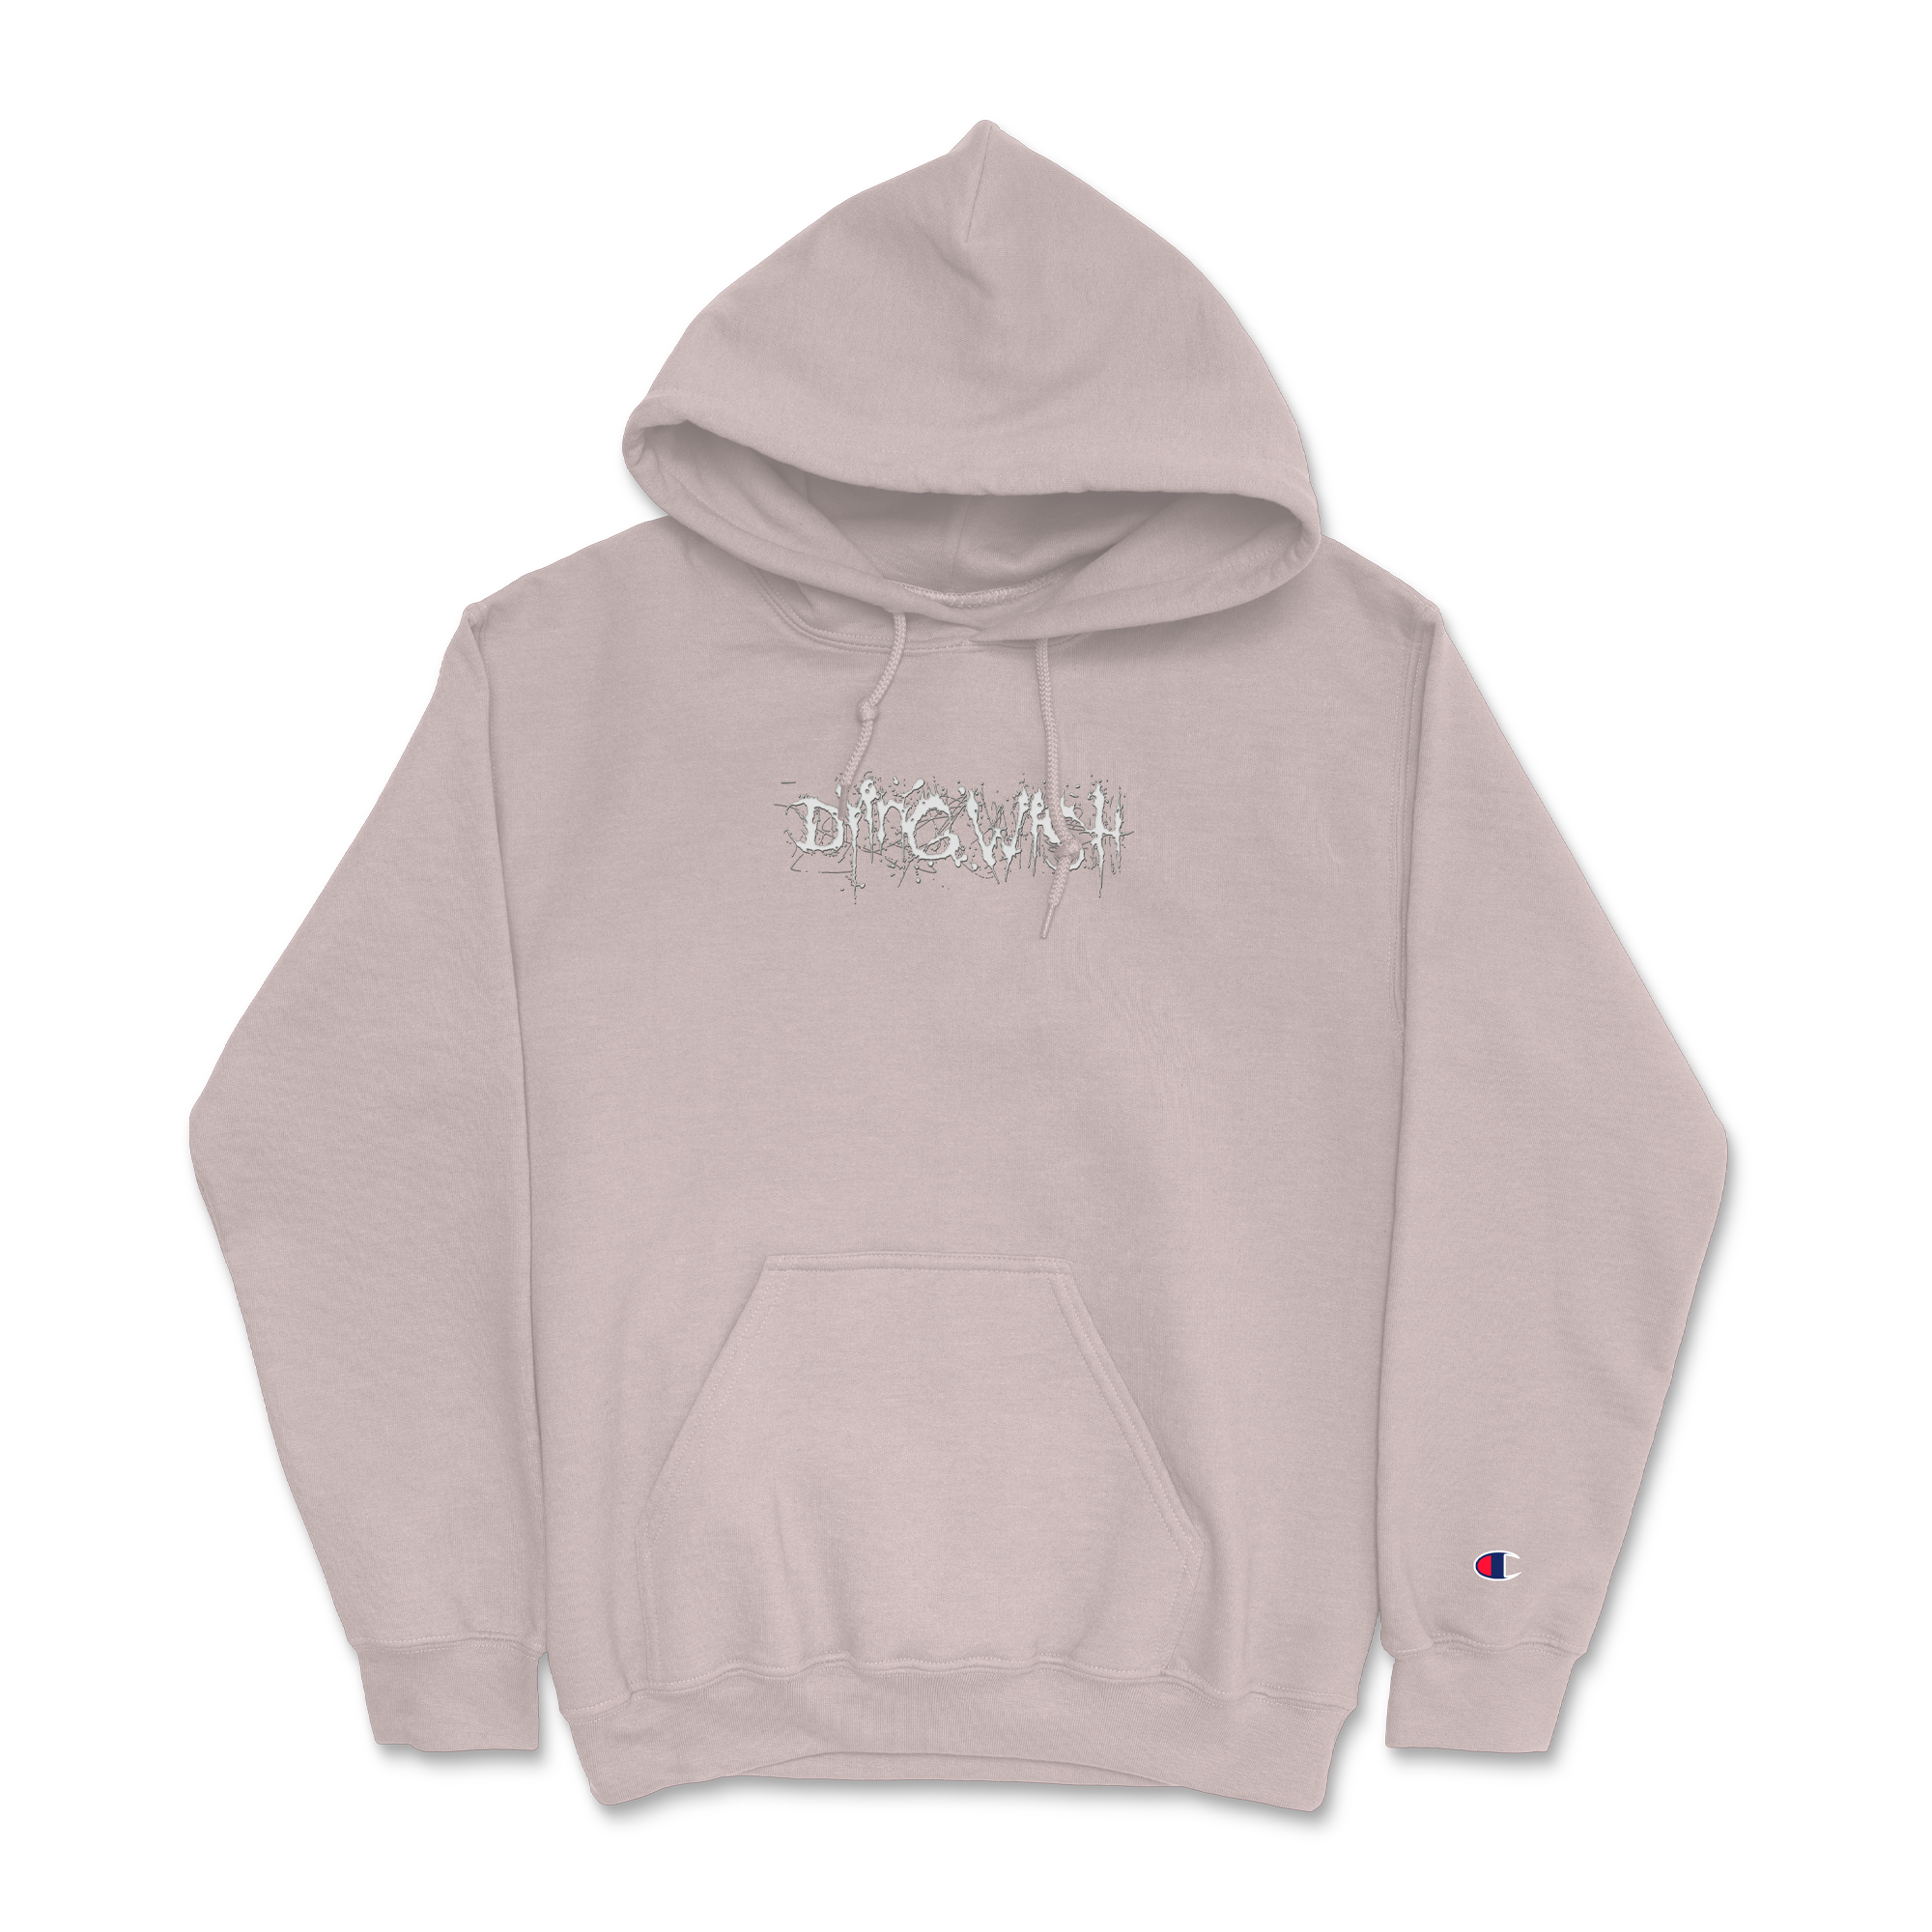 Dying Wish - Embroidered Logo Hoodie